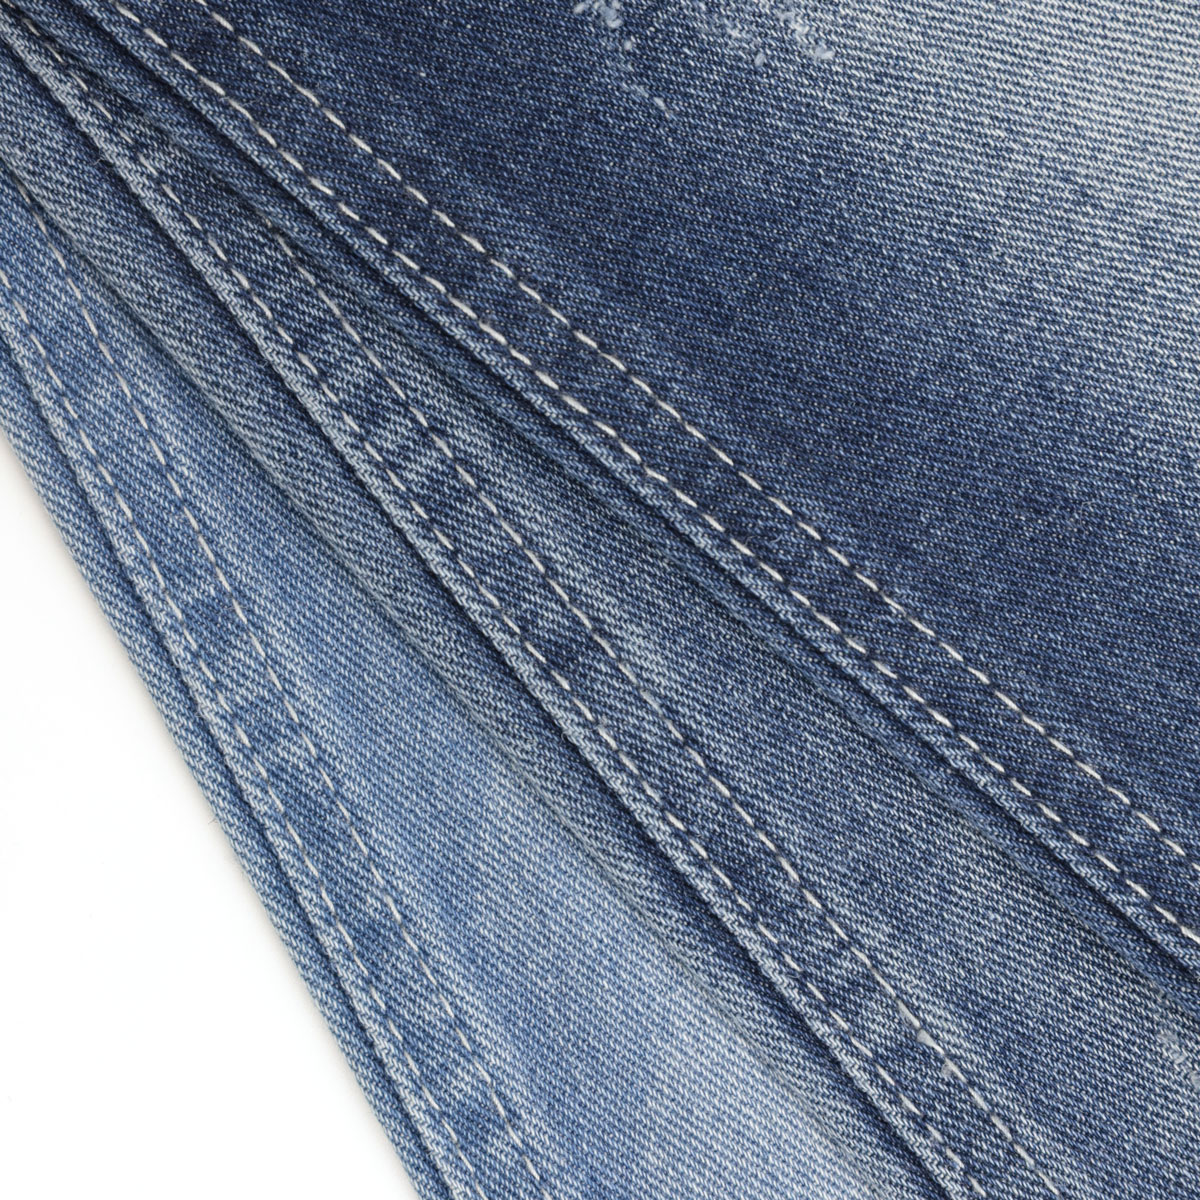 The Best Fabric for Jeans: Stretch Denim Fabric 2